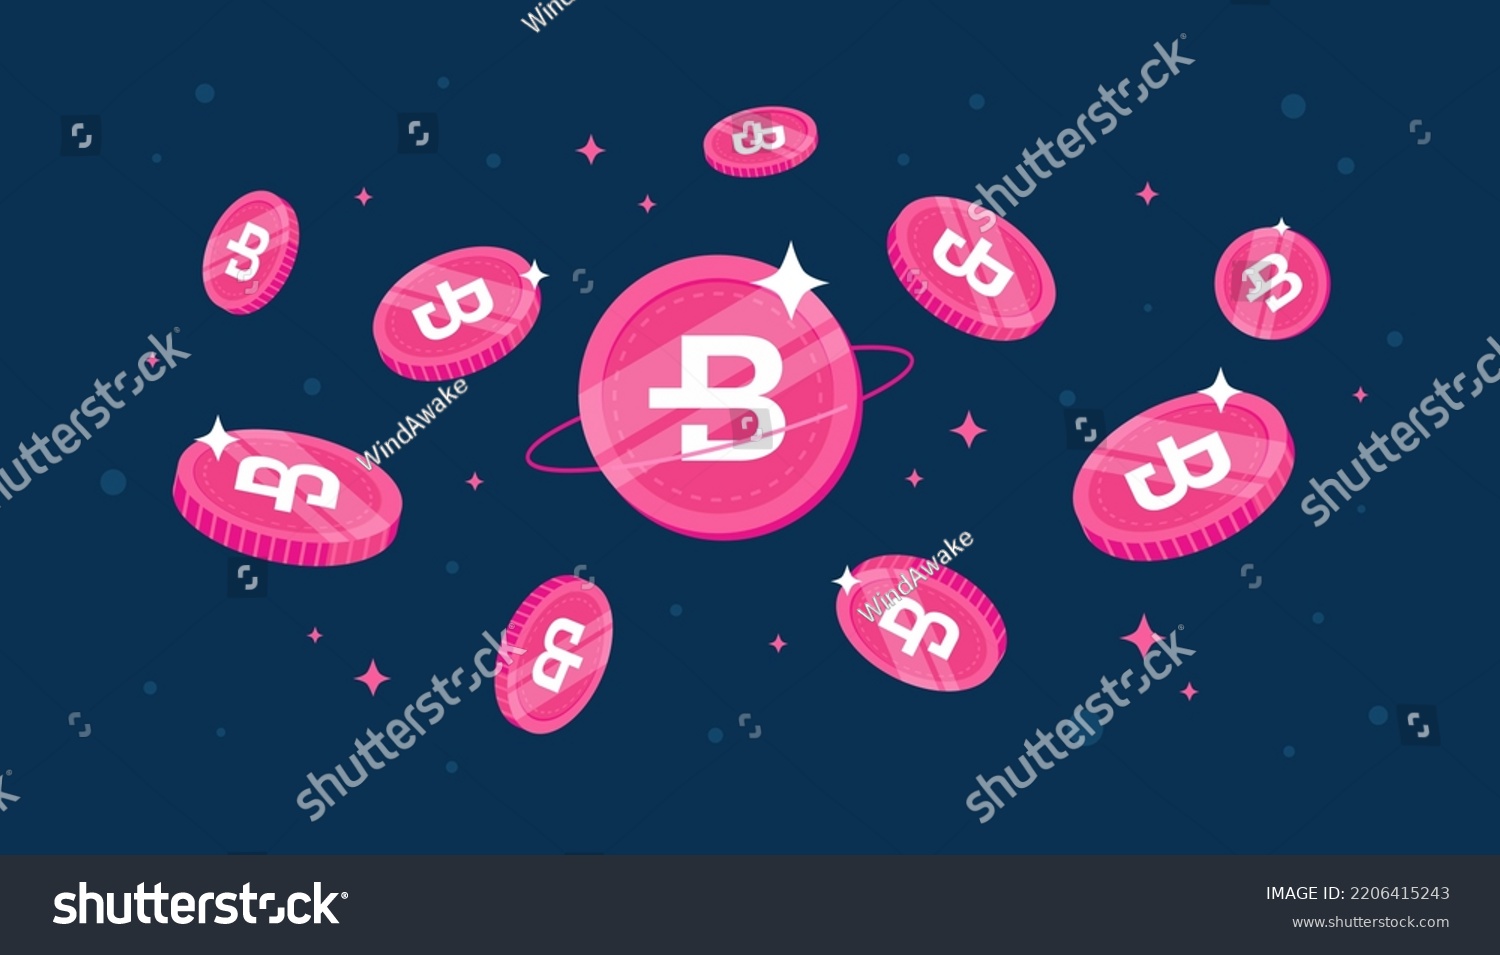 SVG of Bytecoin (BCN) coins falling from the sky. BCN cryptocurrency concept banner background. svg